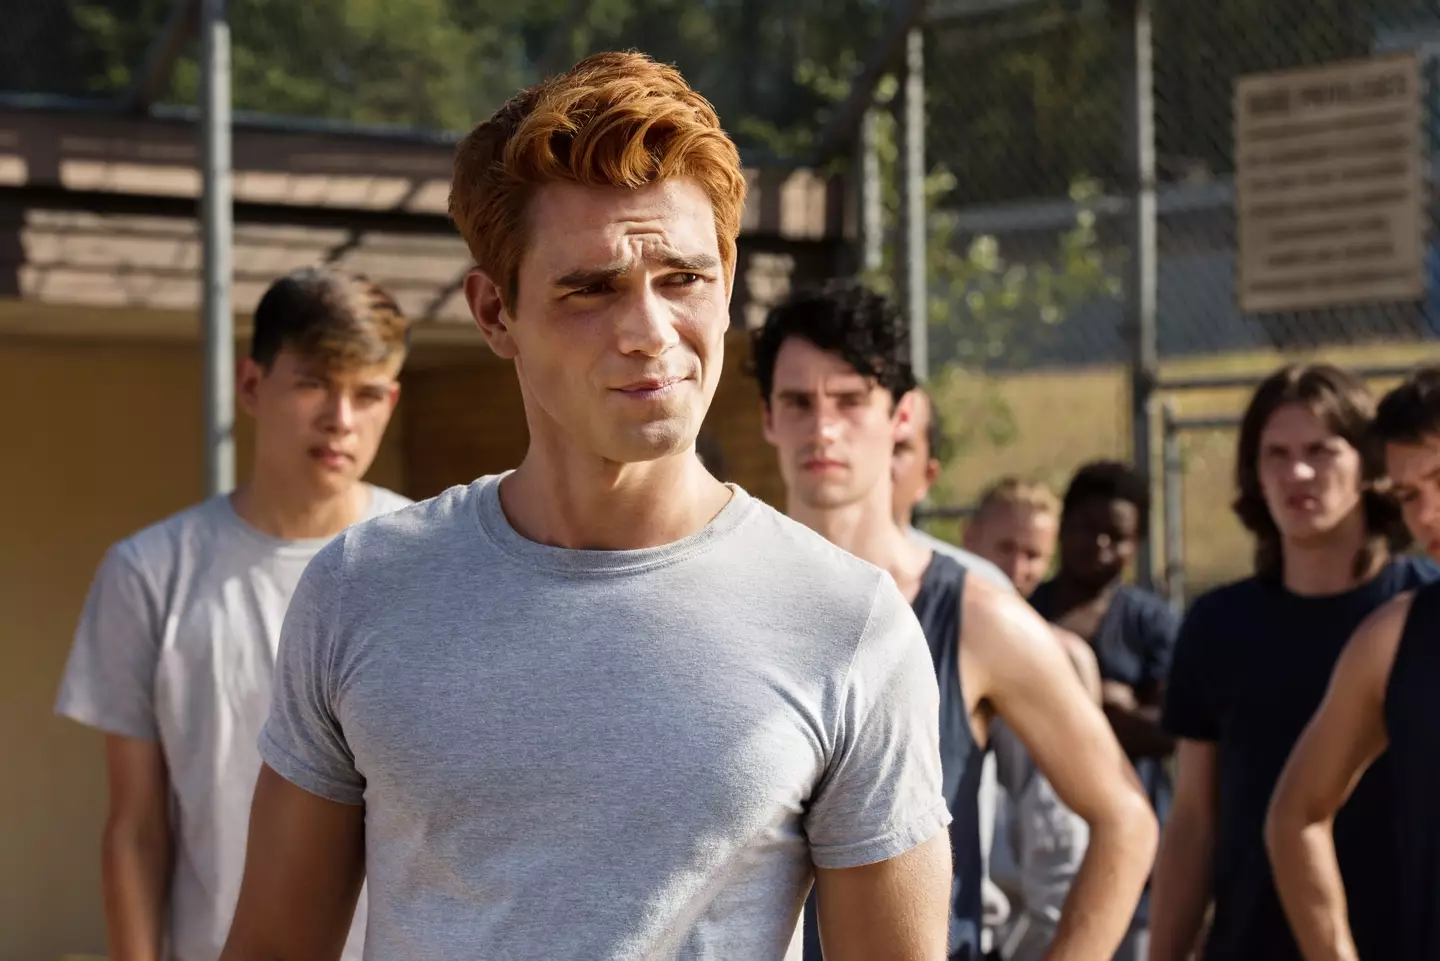 Riverdale fans are confused over this Archie storyline - and it has everything to do with his future and hopes to have a family one day (Netflix).